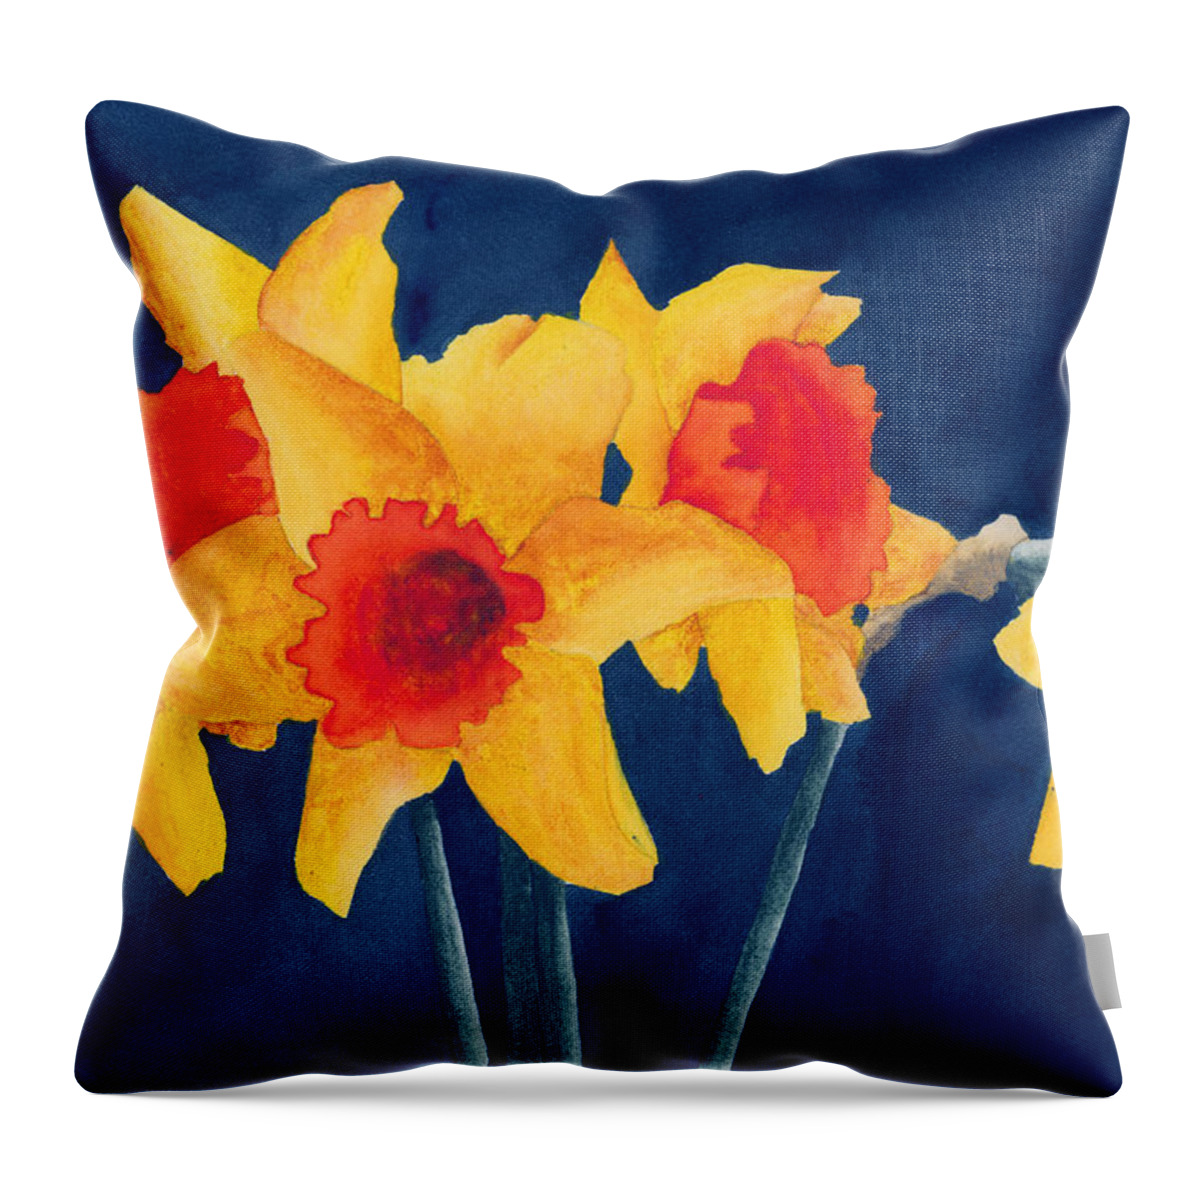 Watercolor Throw Pillow featuring the painting Shy by Ken Powers